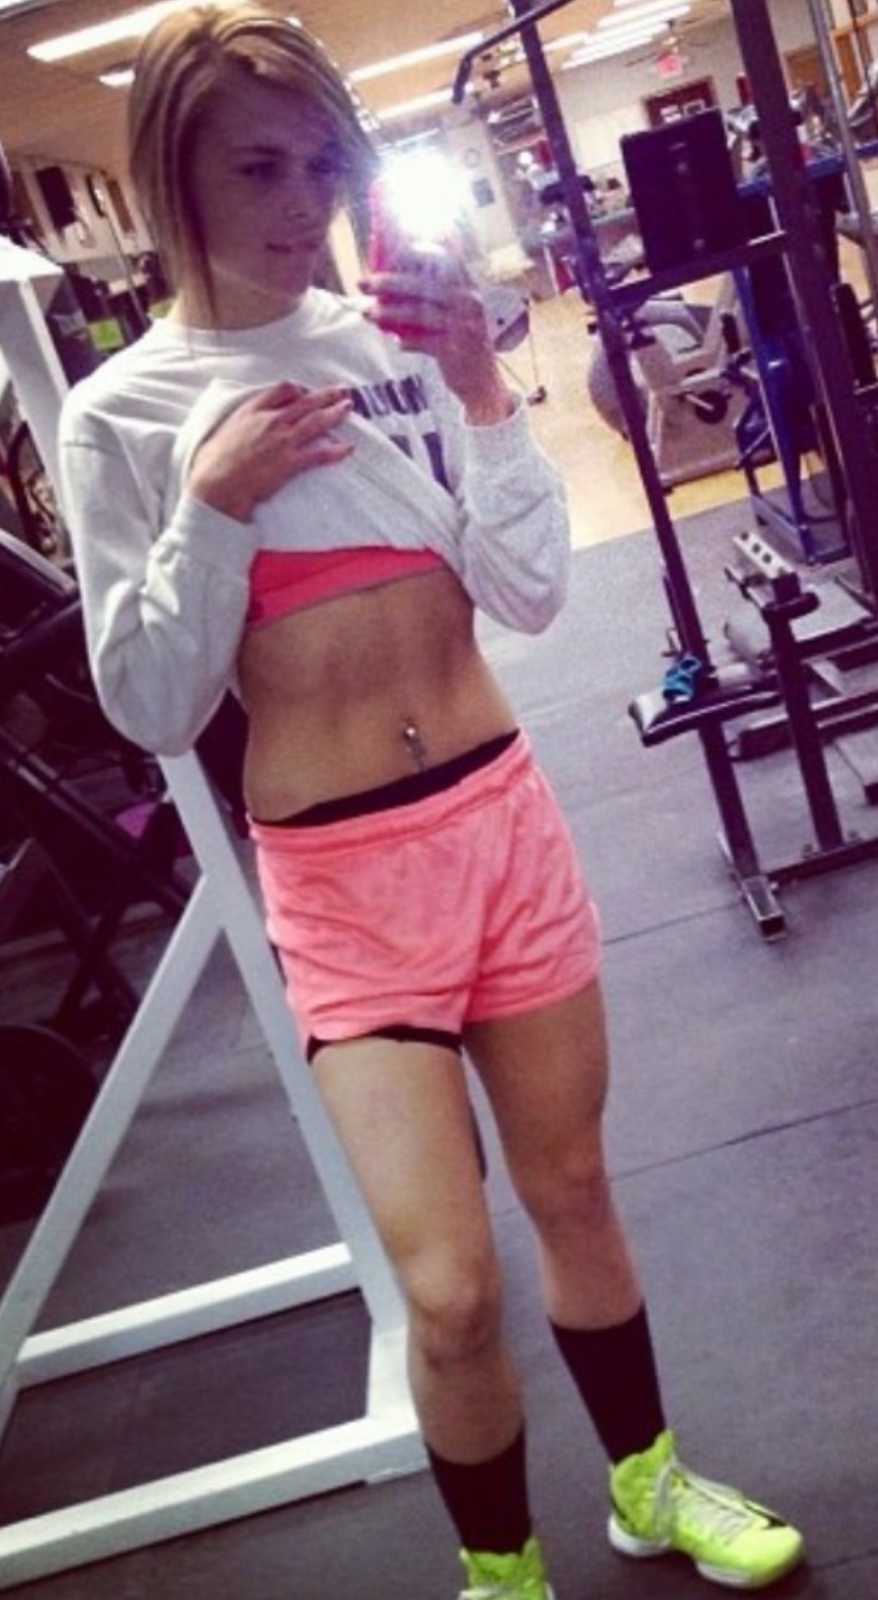 Woman takes a mirror selfie at the gym, showing off her abs